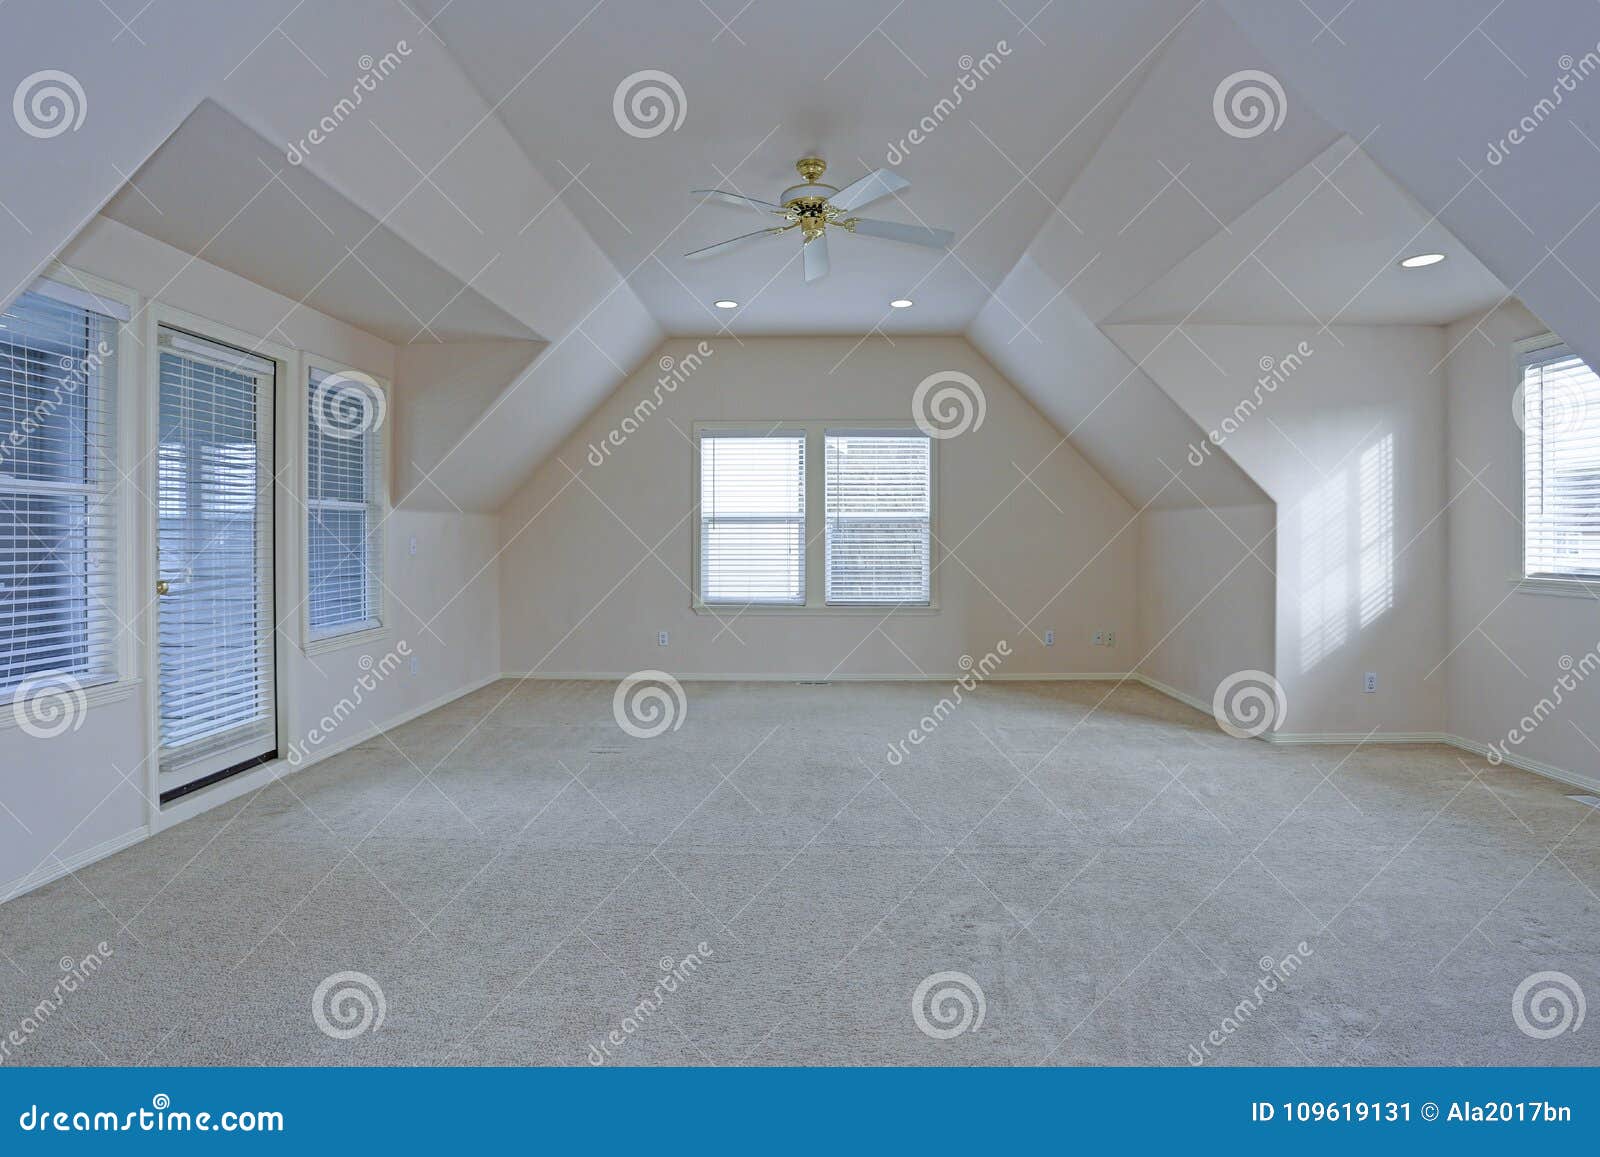 Empty Room Interior With Vaulted Ceiling Stock Image Image